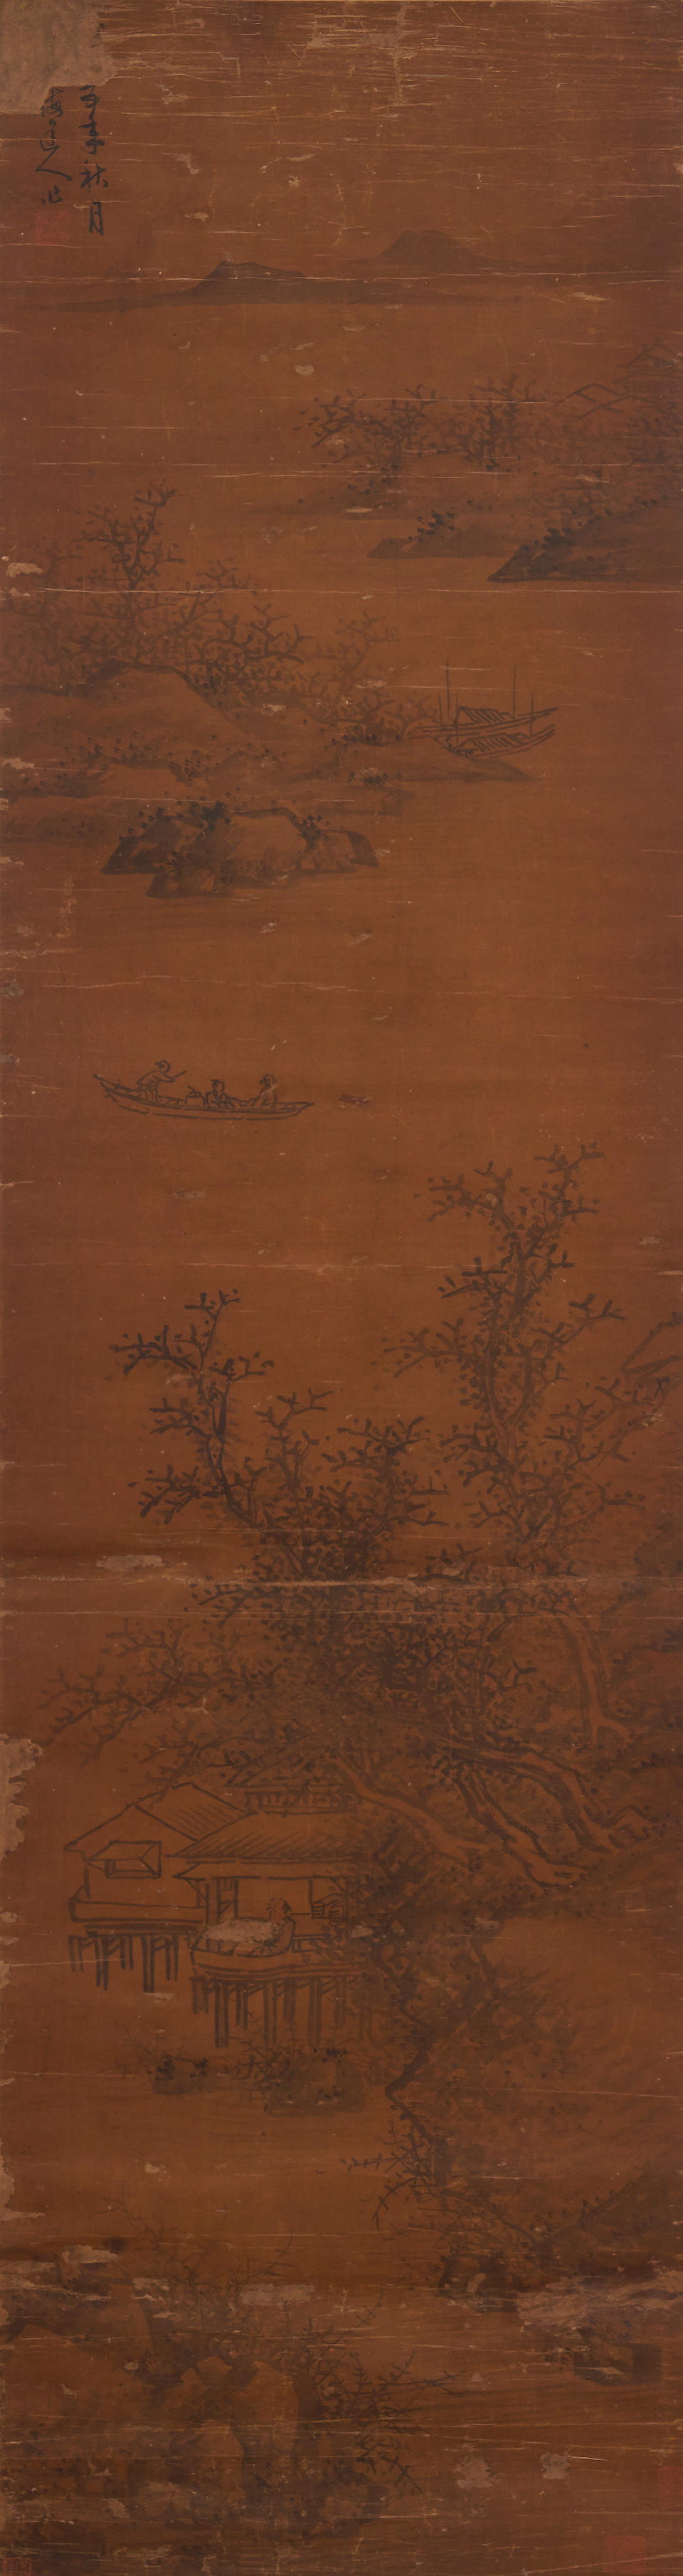 After to Wu Zhen (1280-1354) Landscape (4) - Image 5 of 5